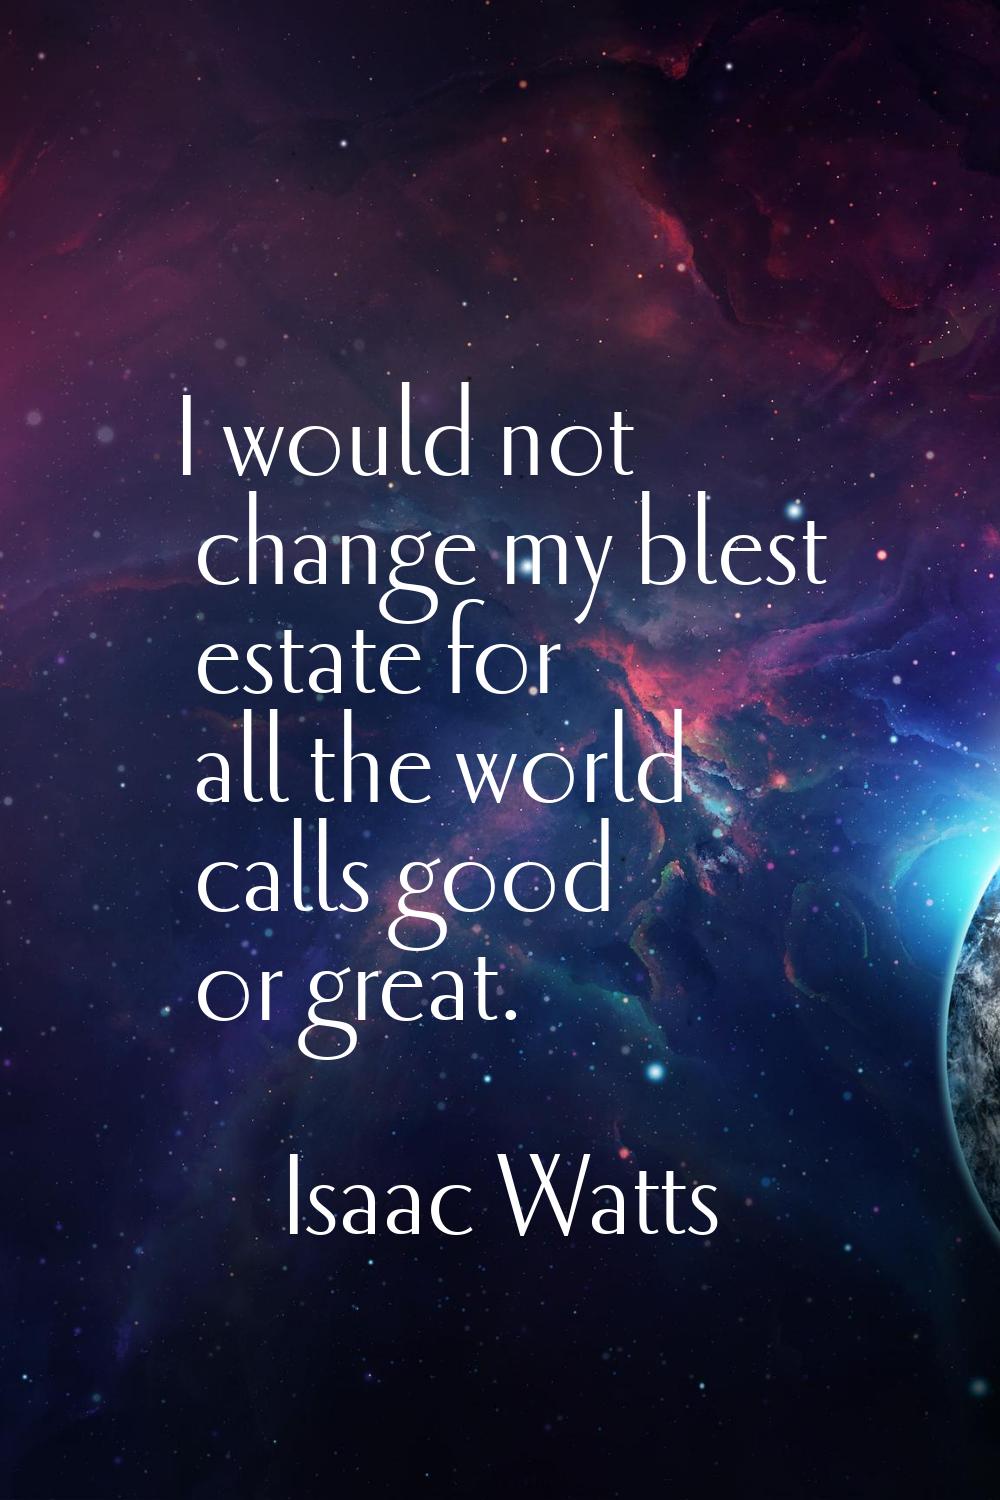 I would not change my blest estate for all the world calls good or great.